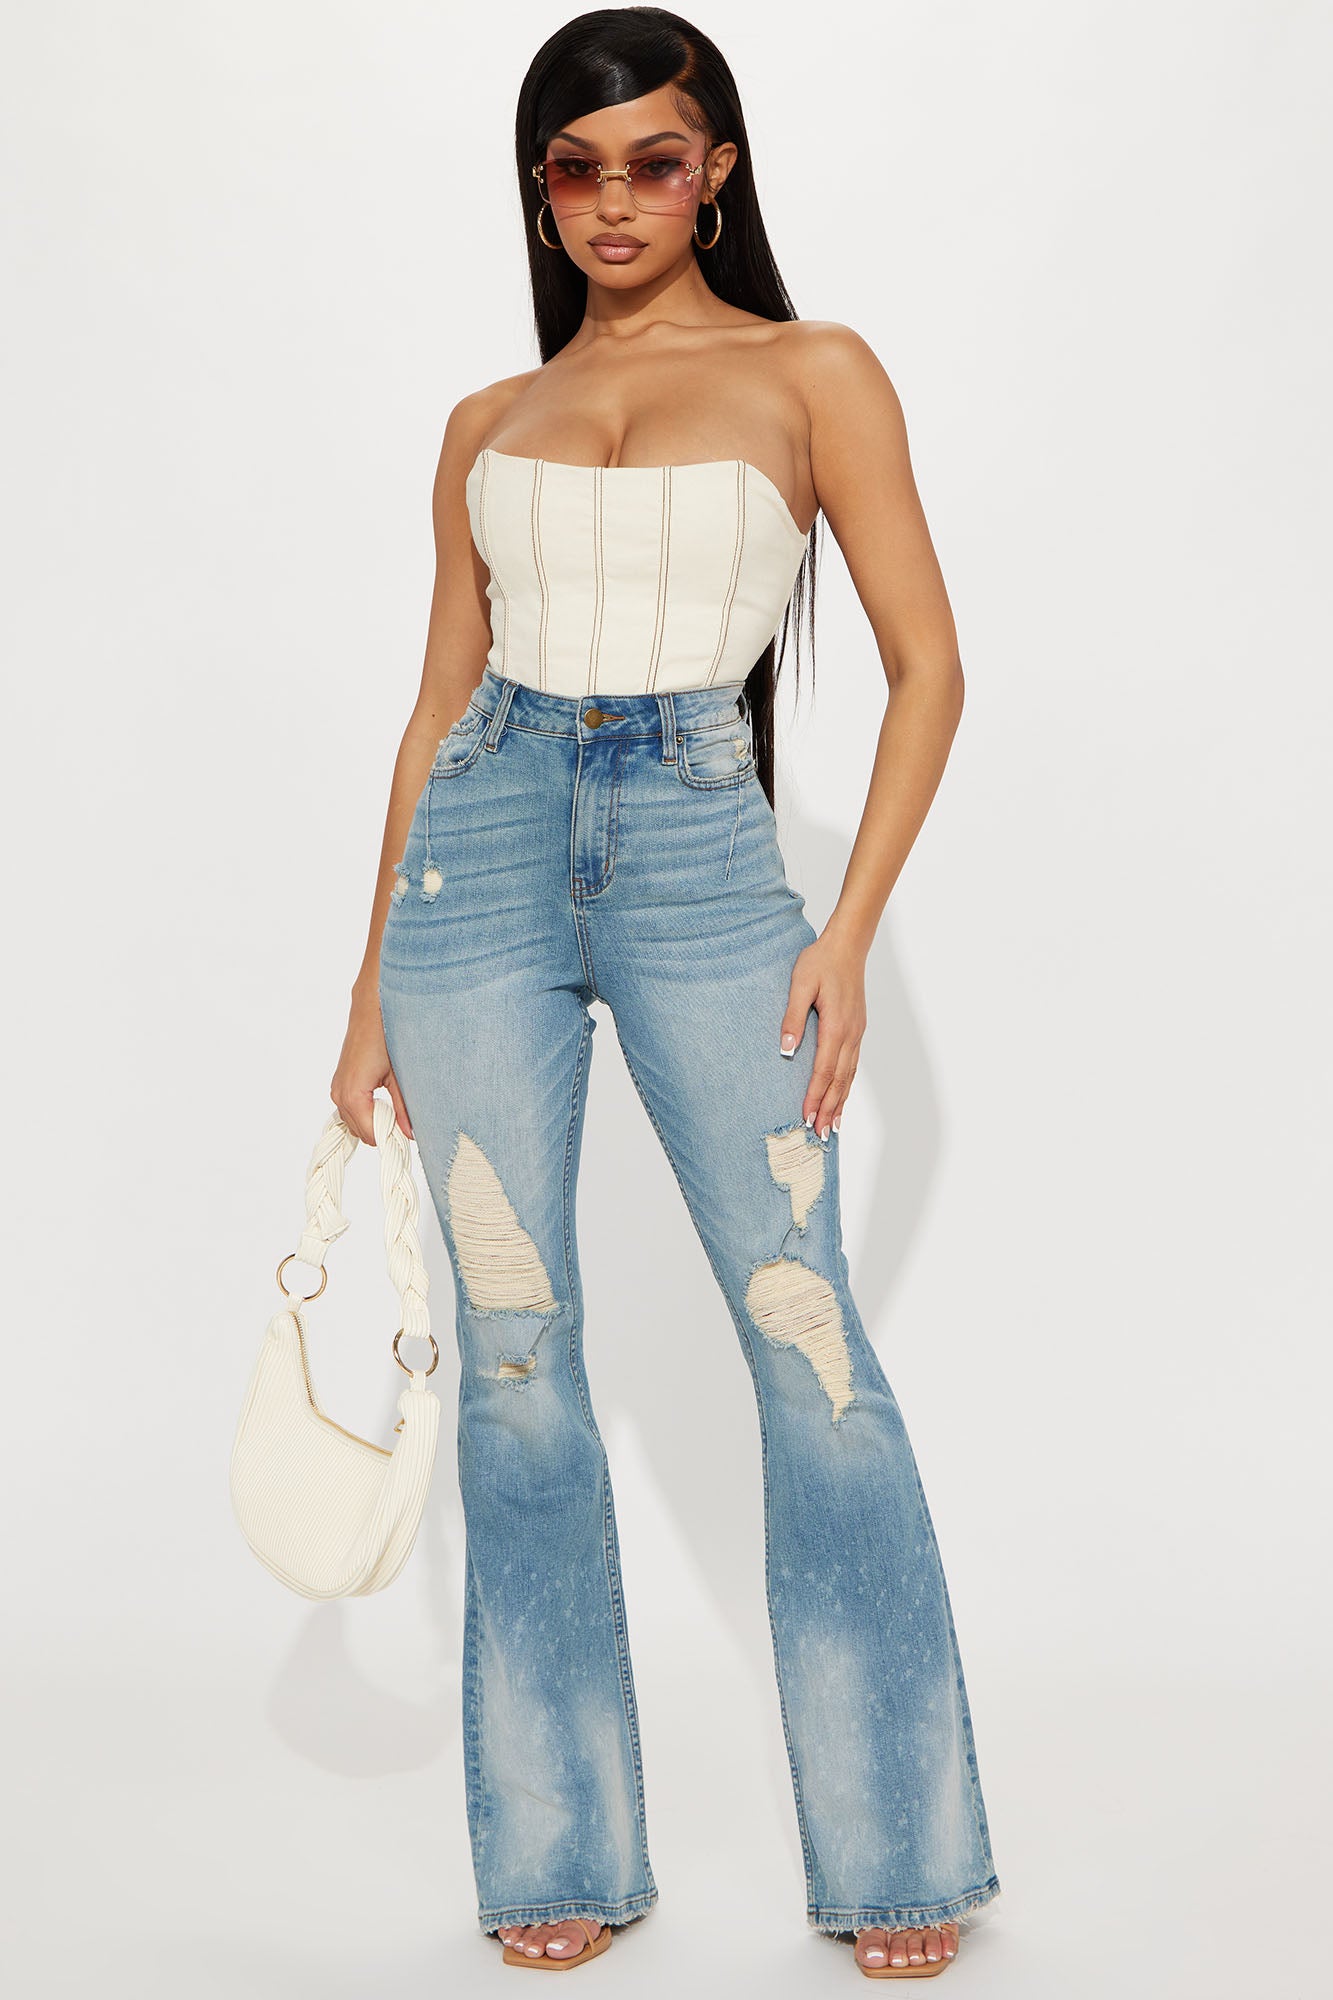 Just A Sec Ripped Low Stretch Flare Jeans - Light Wash